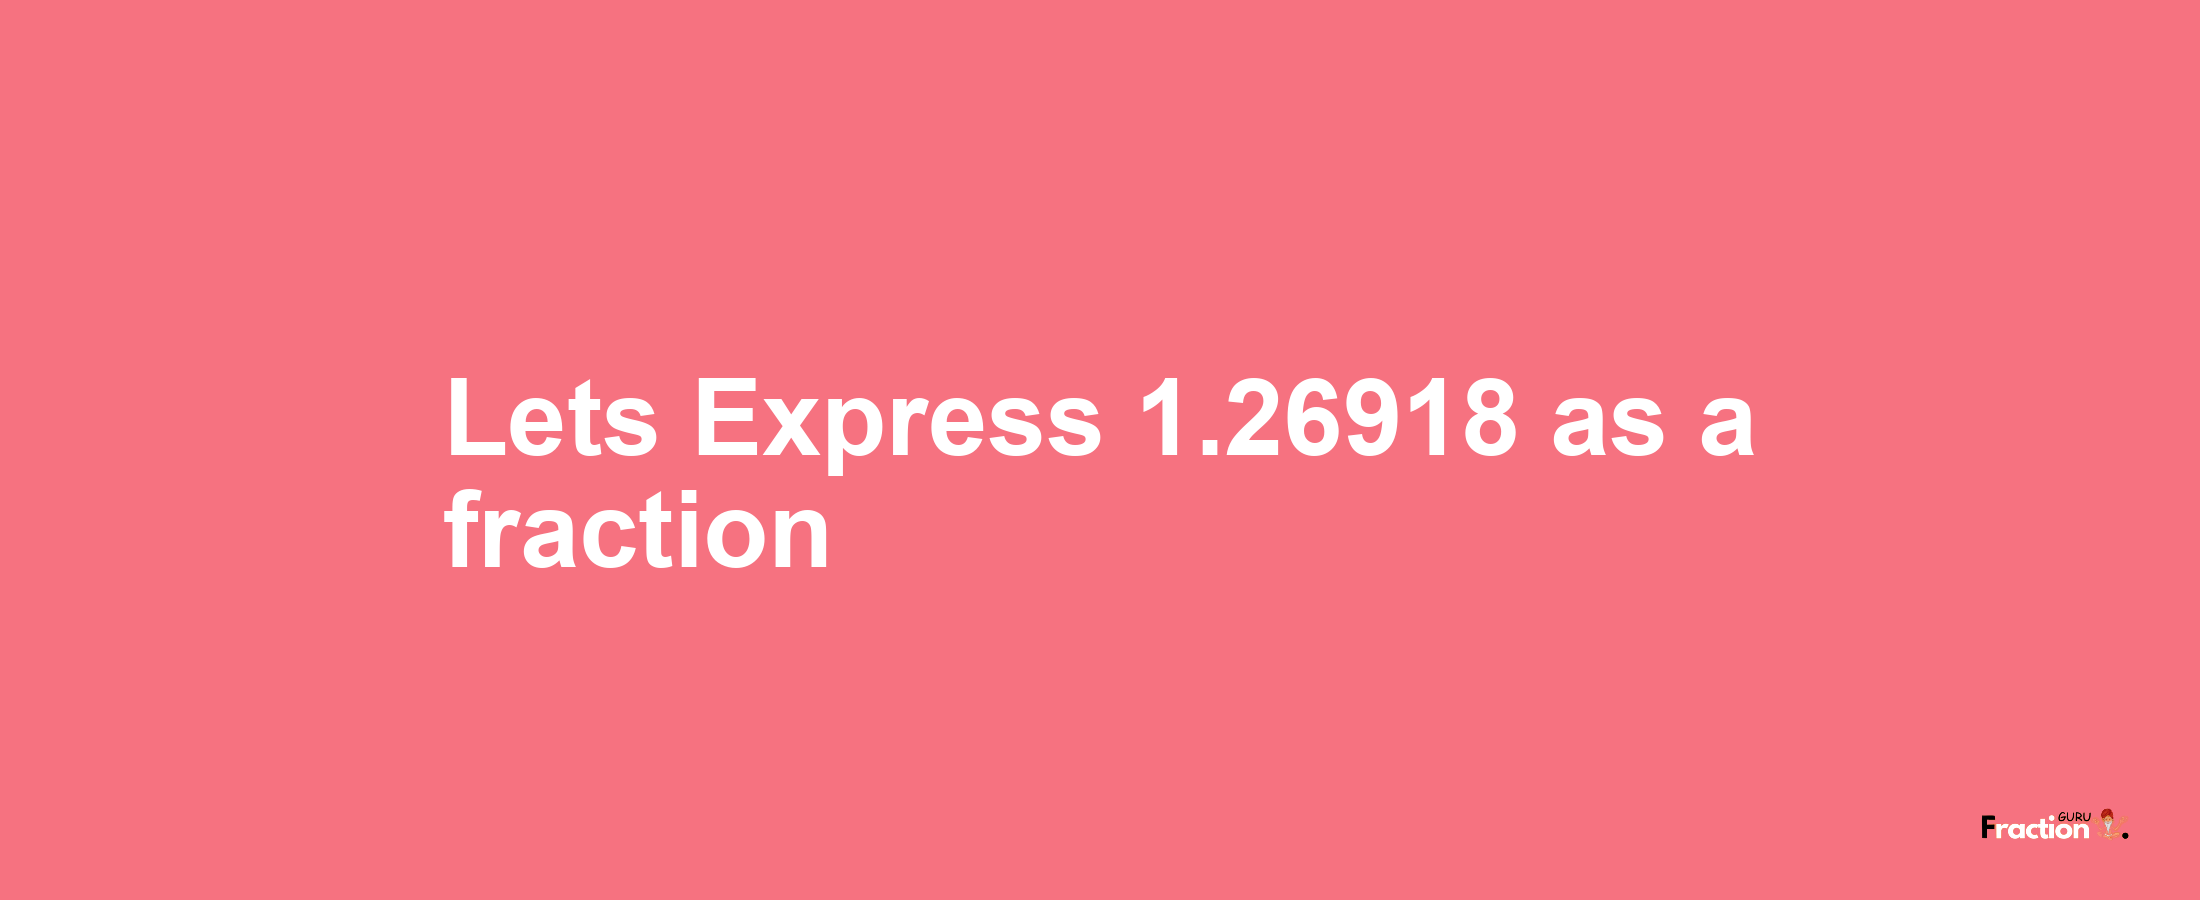 Lets Express 1.26918 as afraction